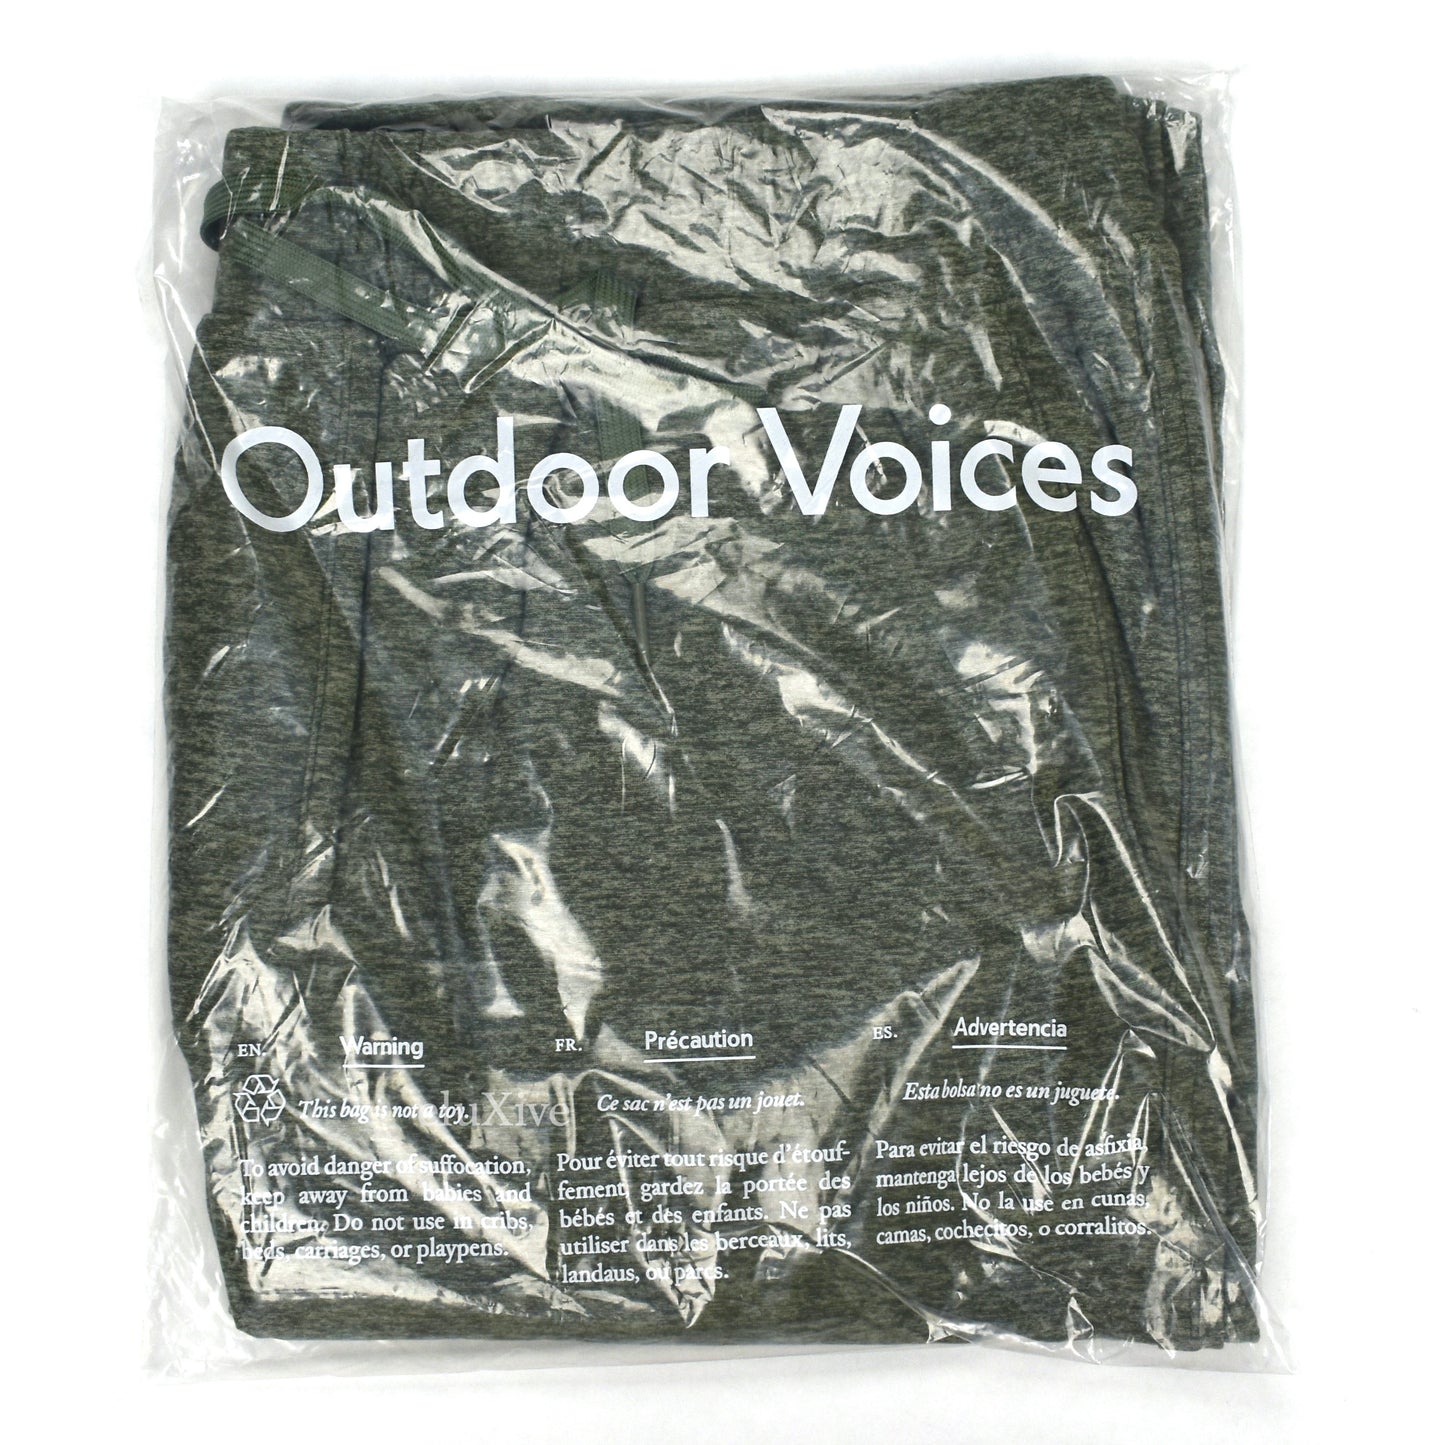 Outdoor Voices - Tea Tree Green All Day Cloudknit Sweatpants